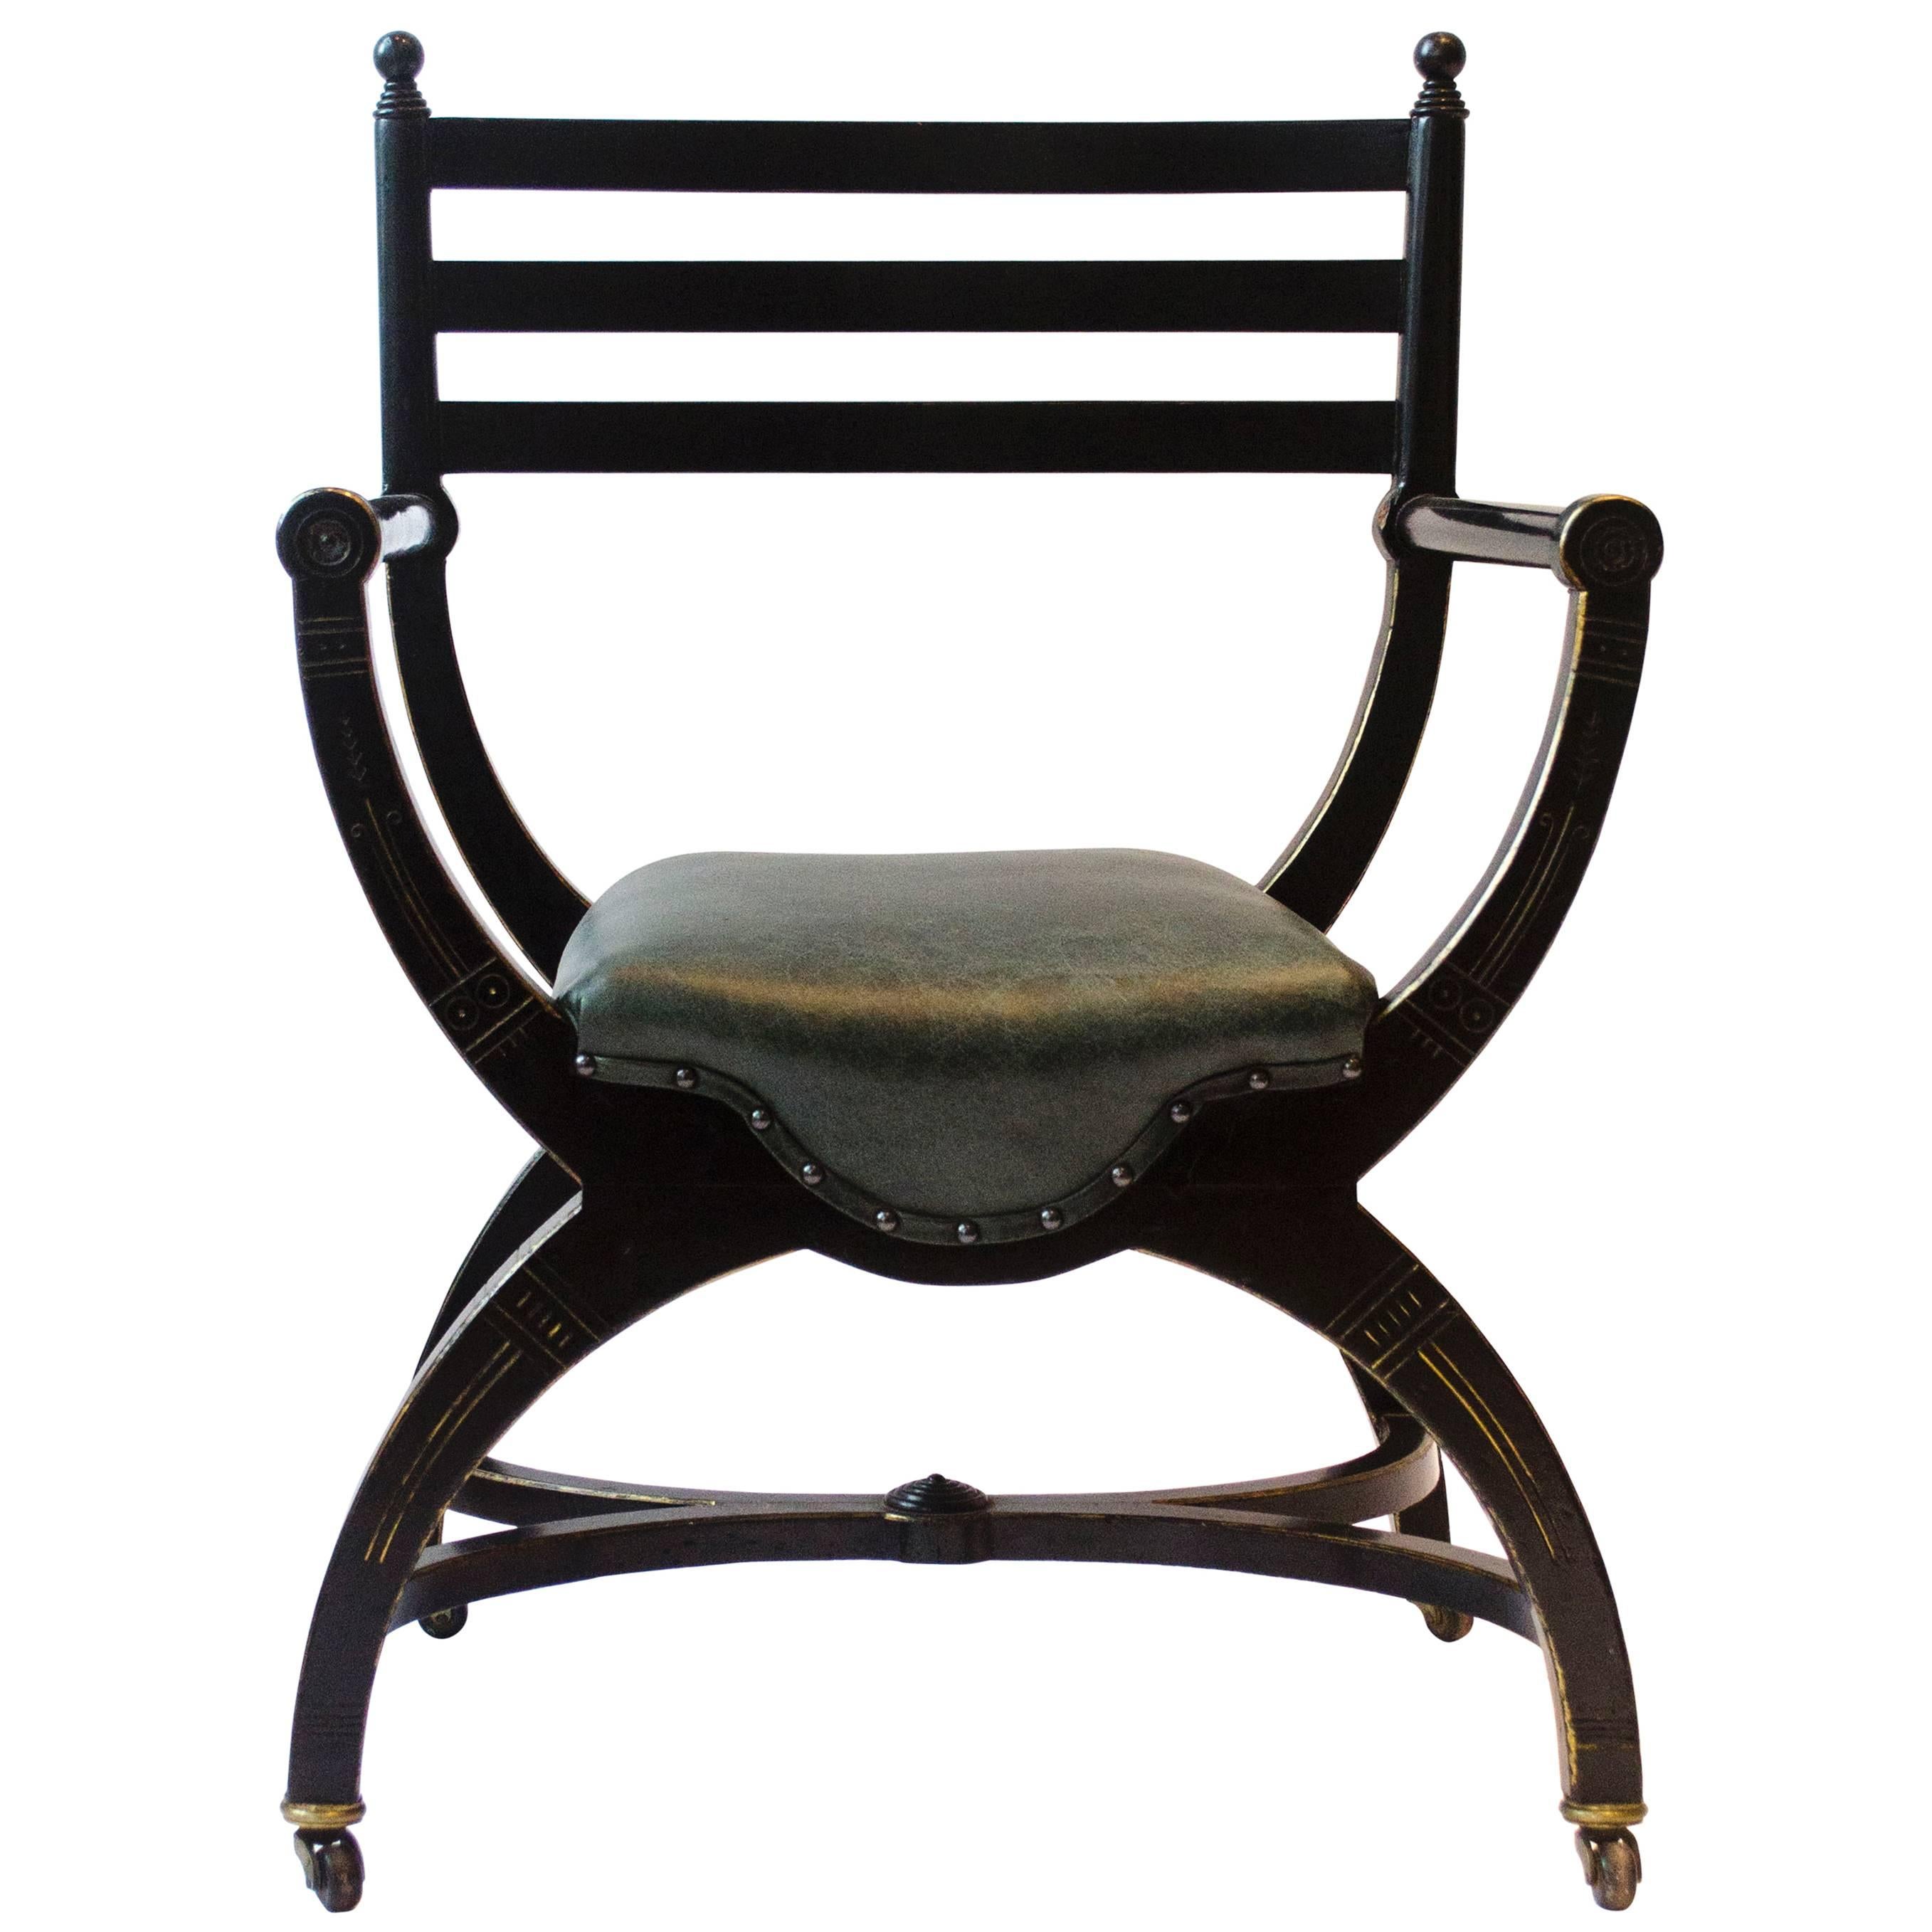 Richard Charles Aesthetic Movement Ebonised Elbow Chair with X Frame stretcher